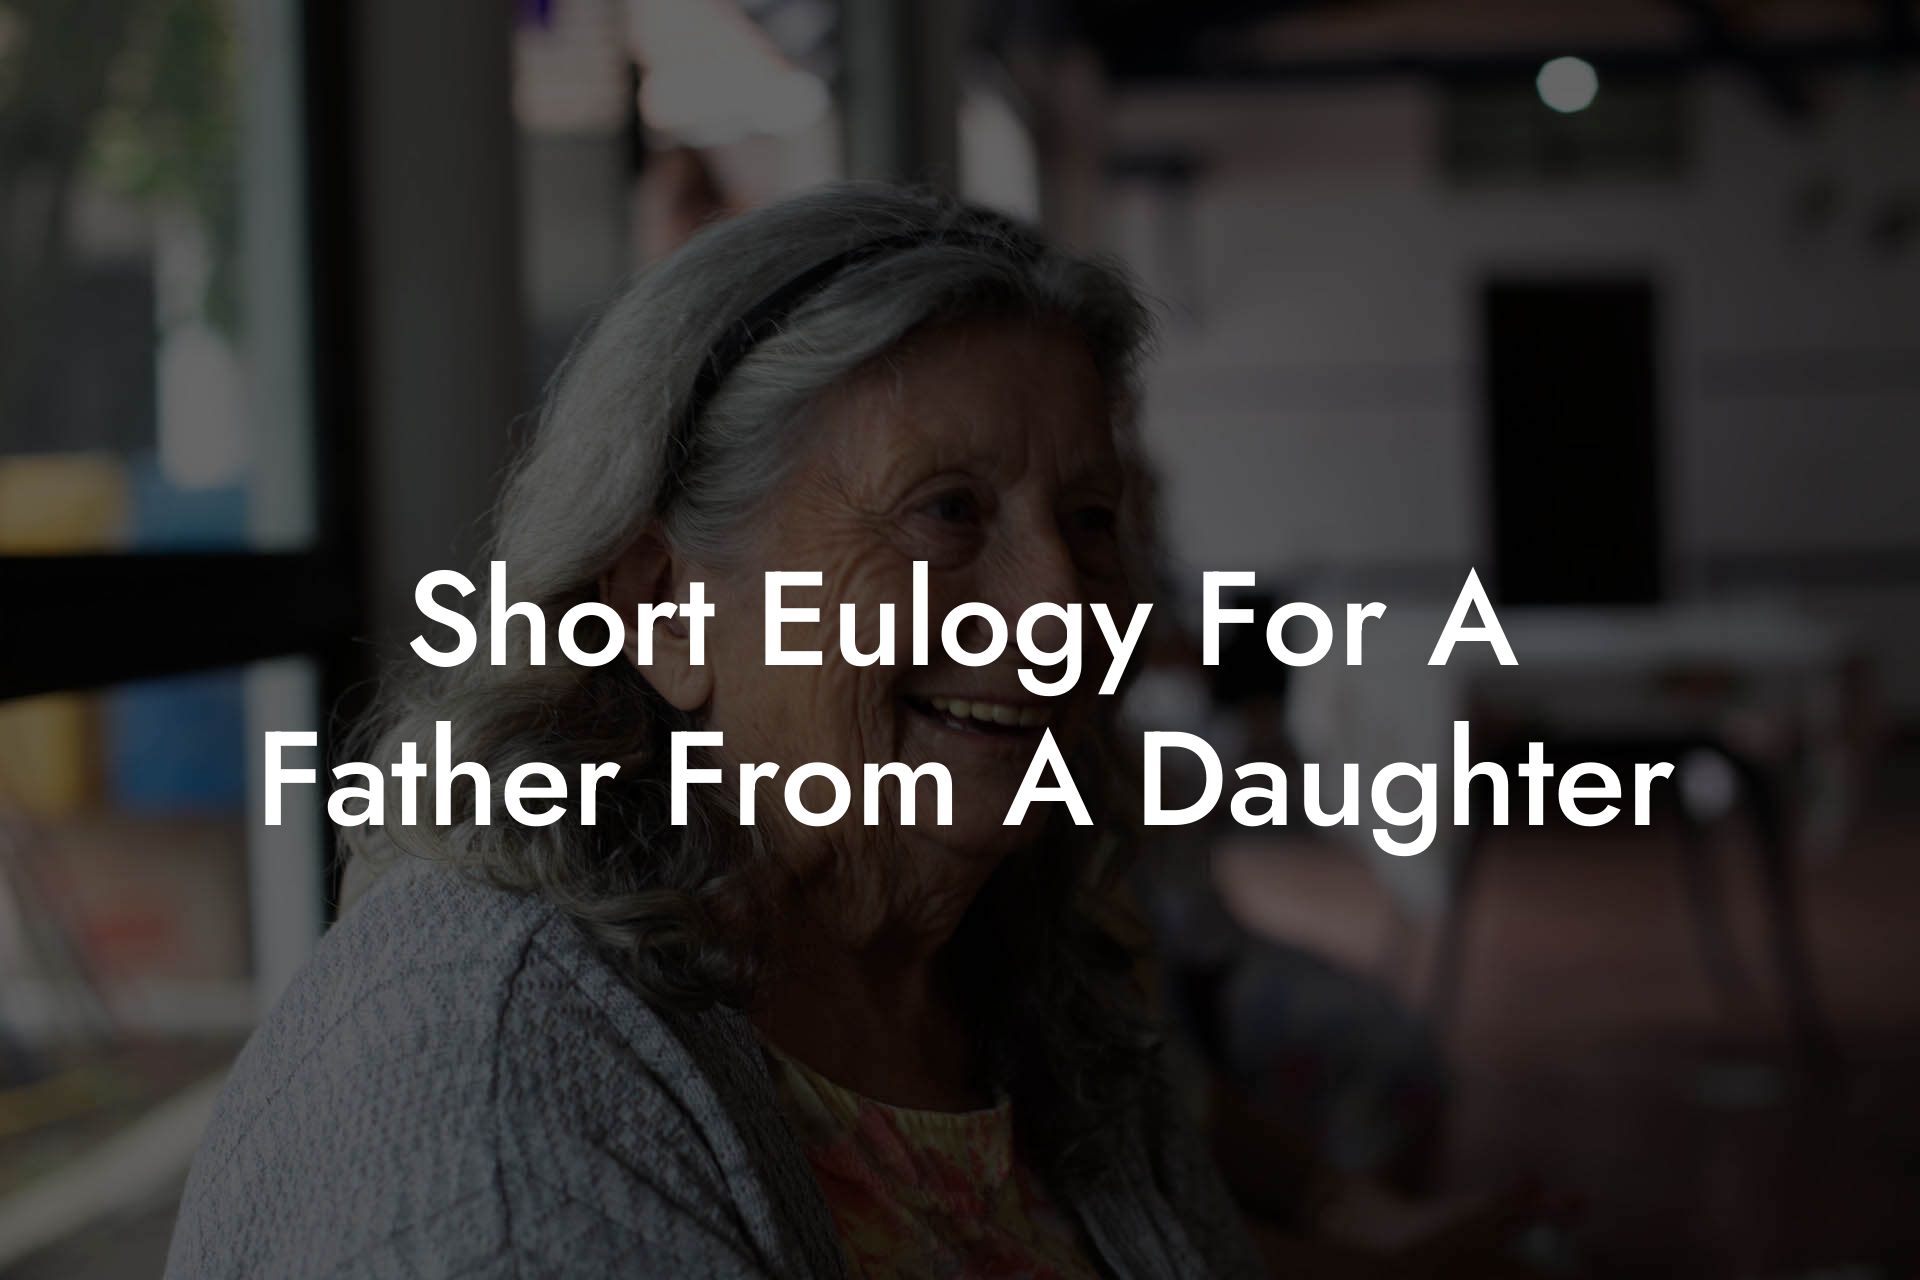 Short Eulogy For A Father From A Daughter